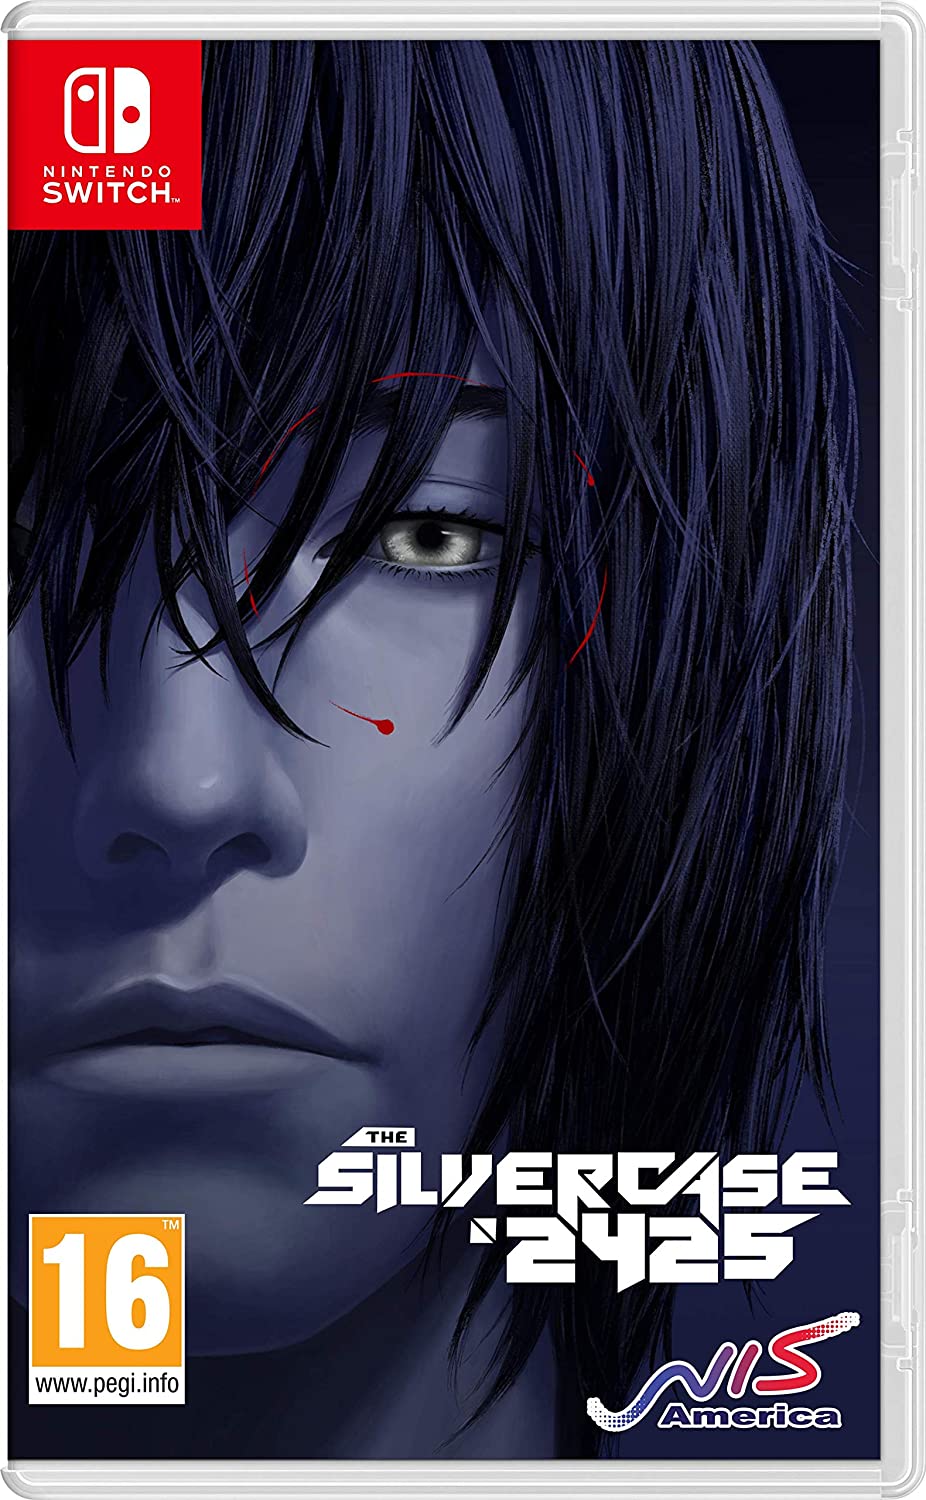 The Silver Case 2425 (Deluxe Edition) Nintendo Switch